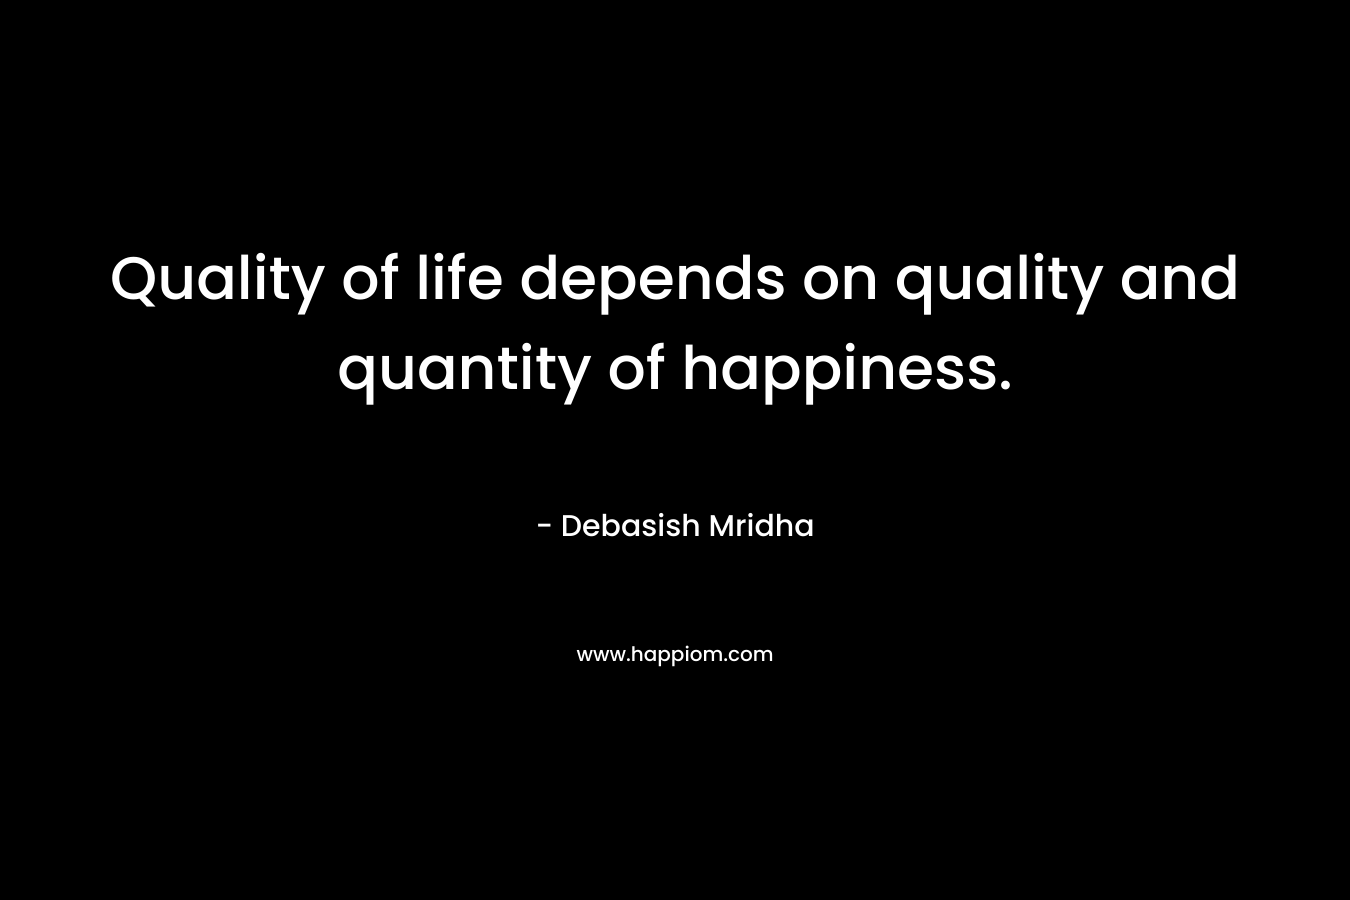 Quality of life depends on quality and quantity of happiness.